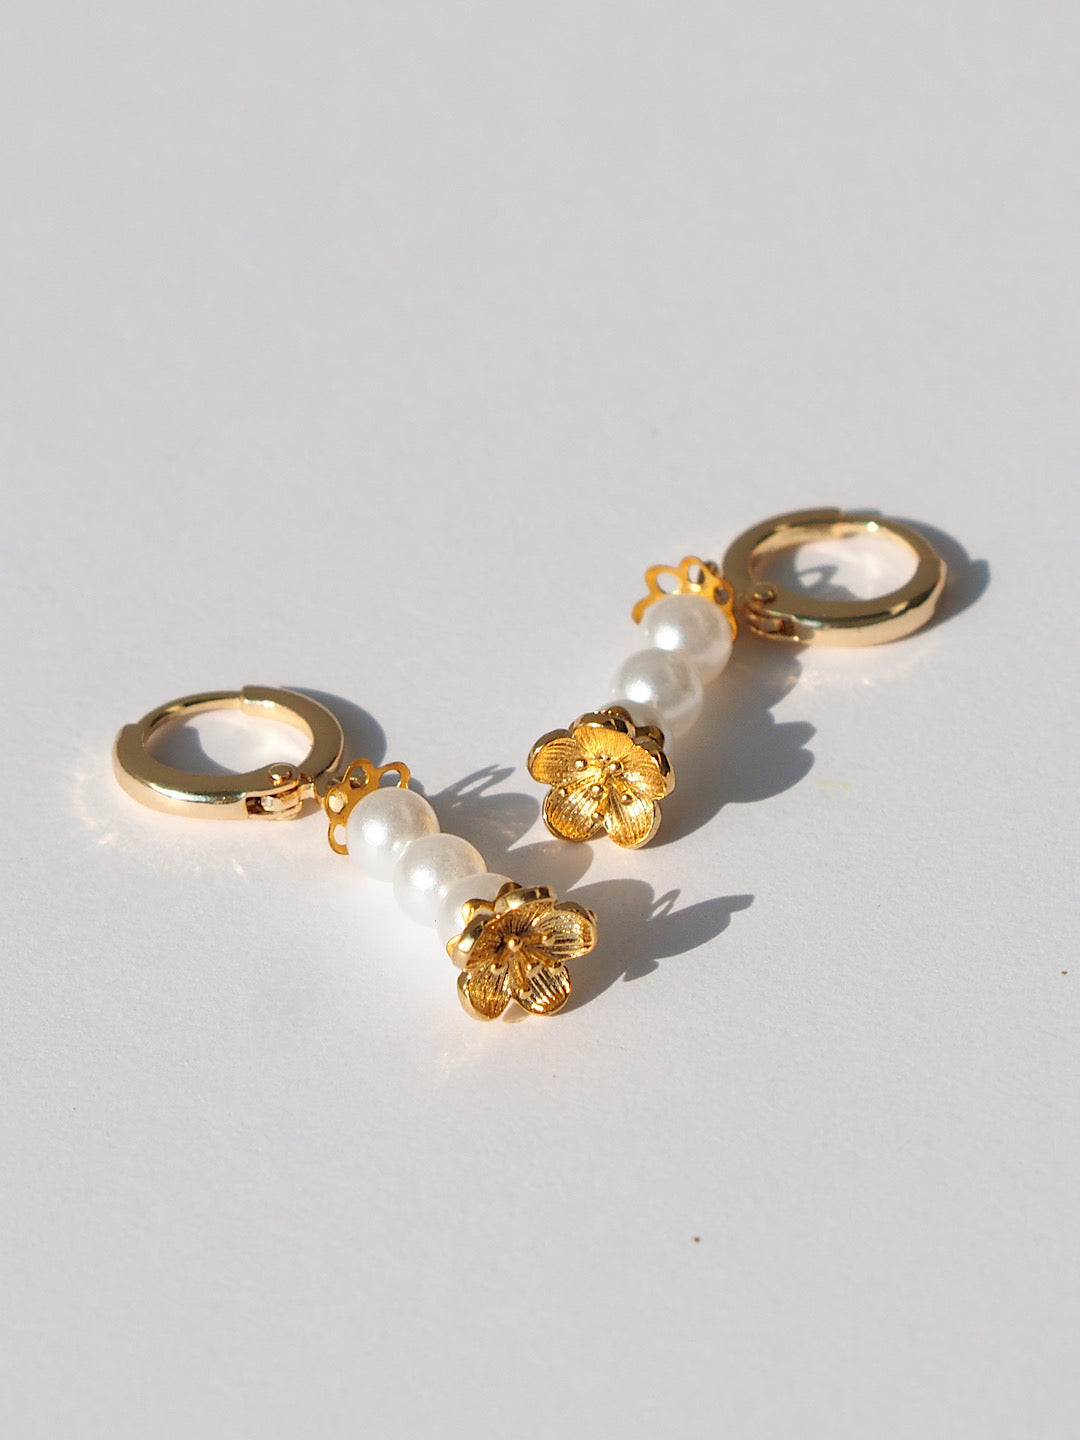 Dorothea Pearls, 24k gold-plated